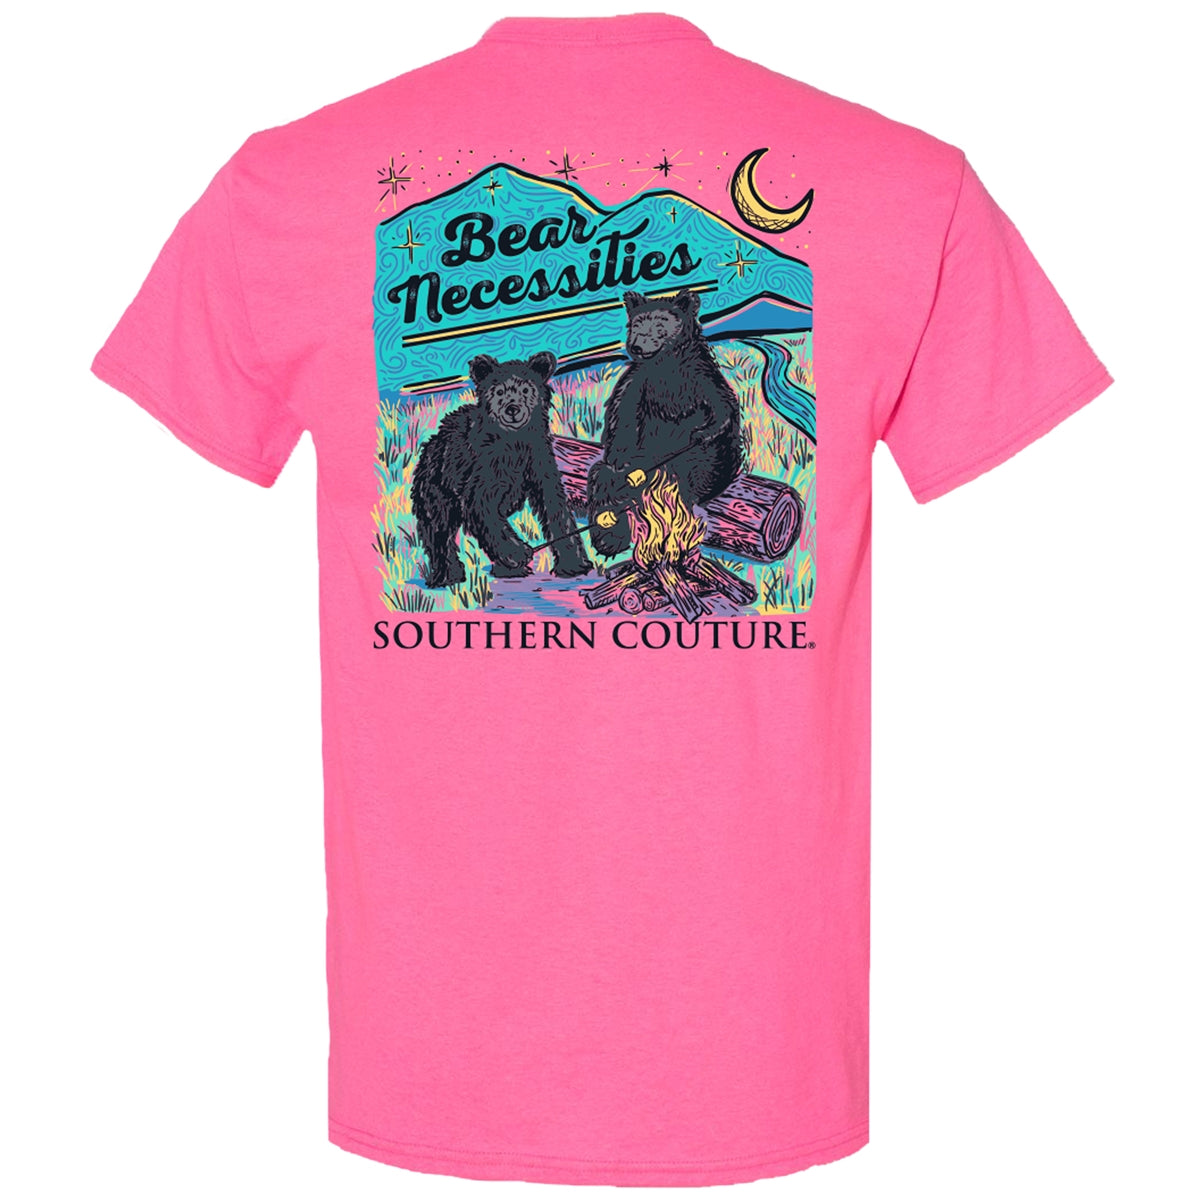 Southern Couture Classic Bear Necessities T-Shirt